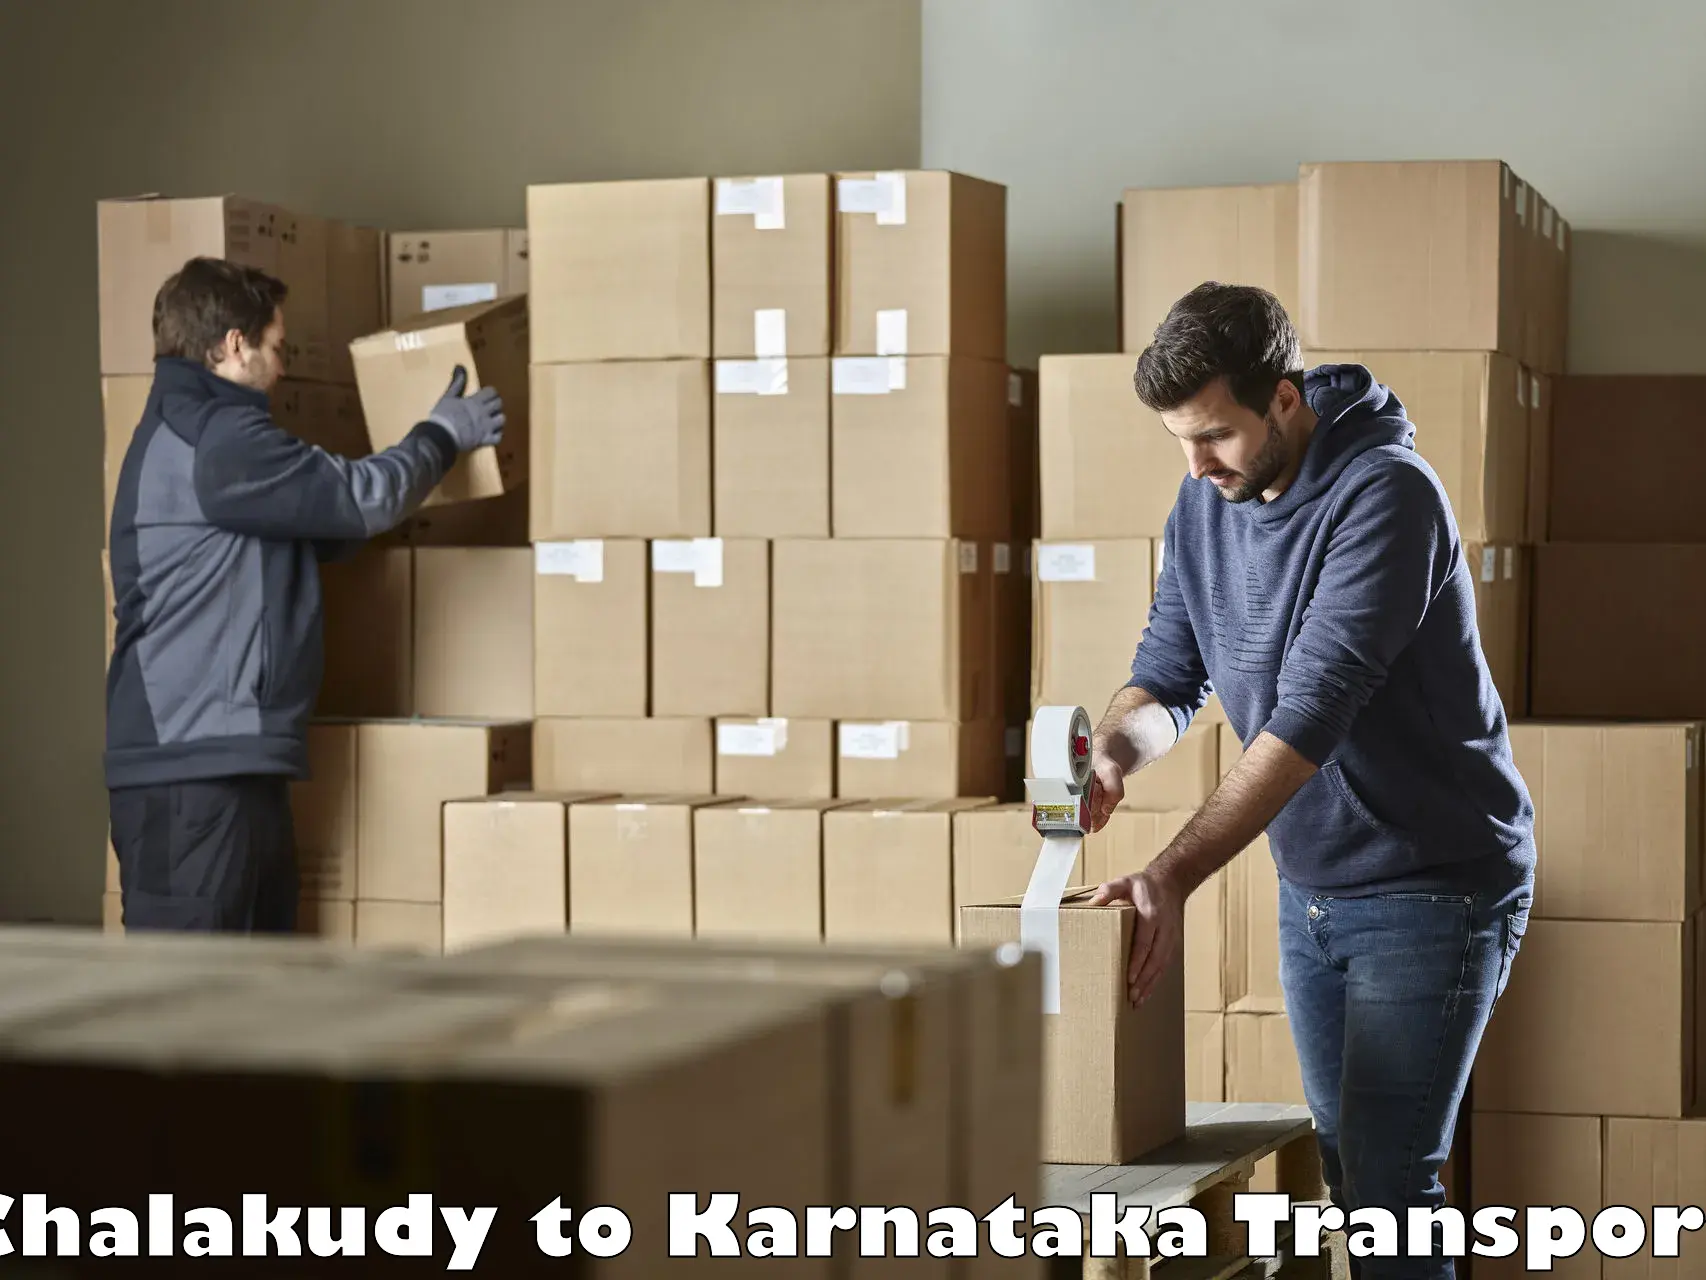 Transport bike from one state to another Chalakudy to Karnataka